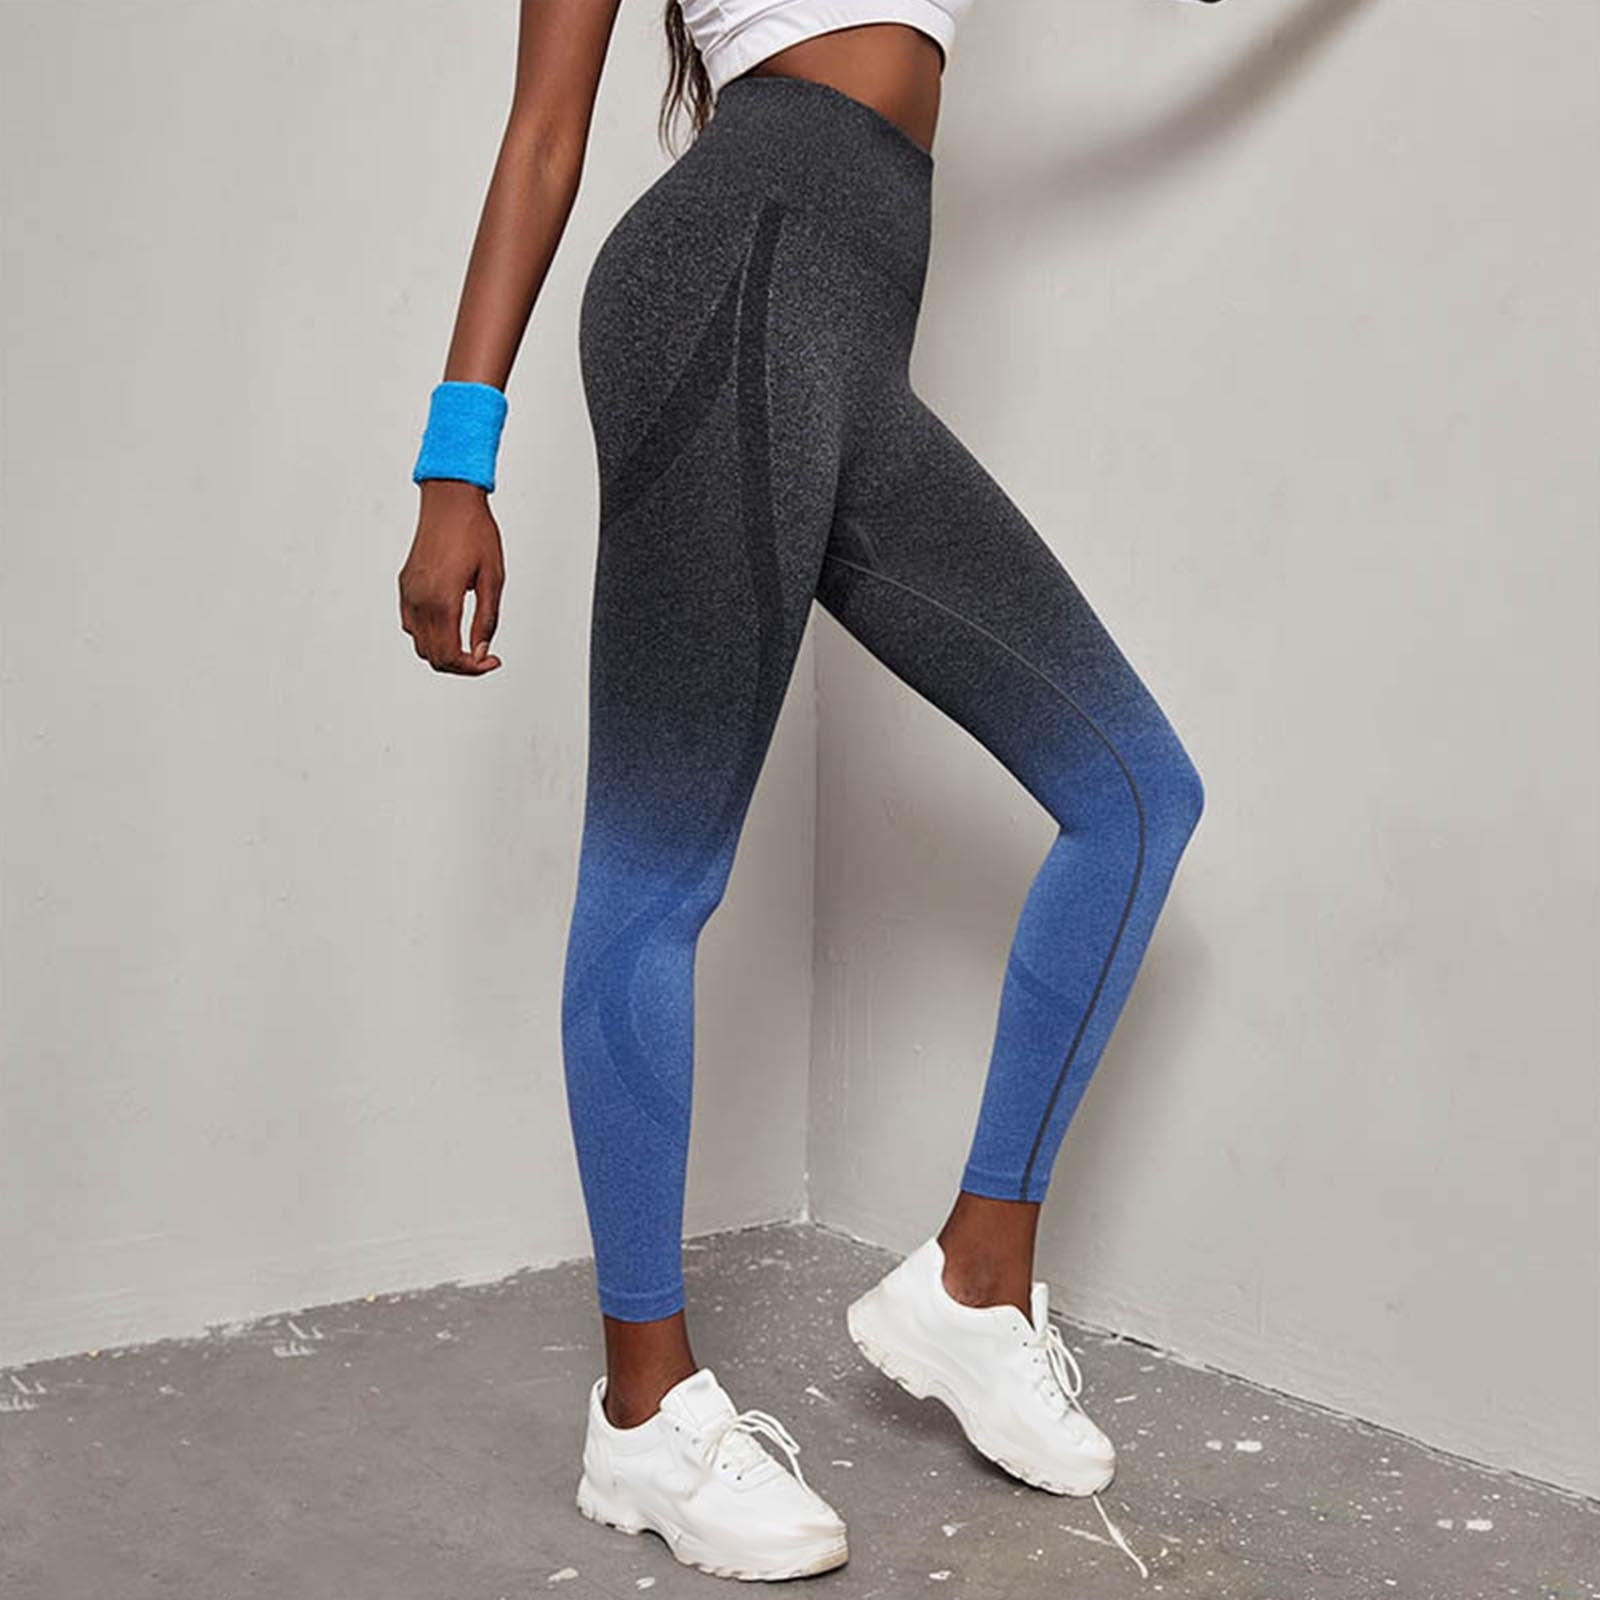 High Quality Women Legging, Blue Sports Leggings, Gym Pants, Workout  Trousers, Gym Clothes, Activewear for Women 